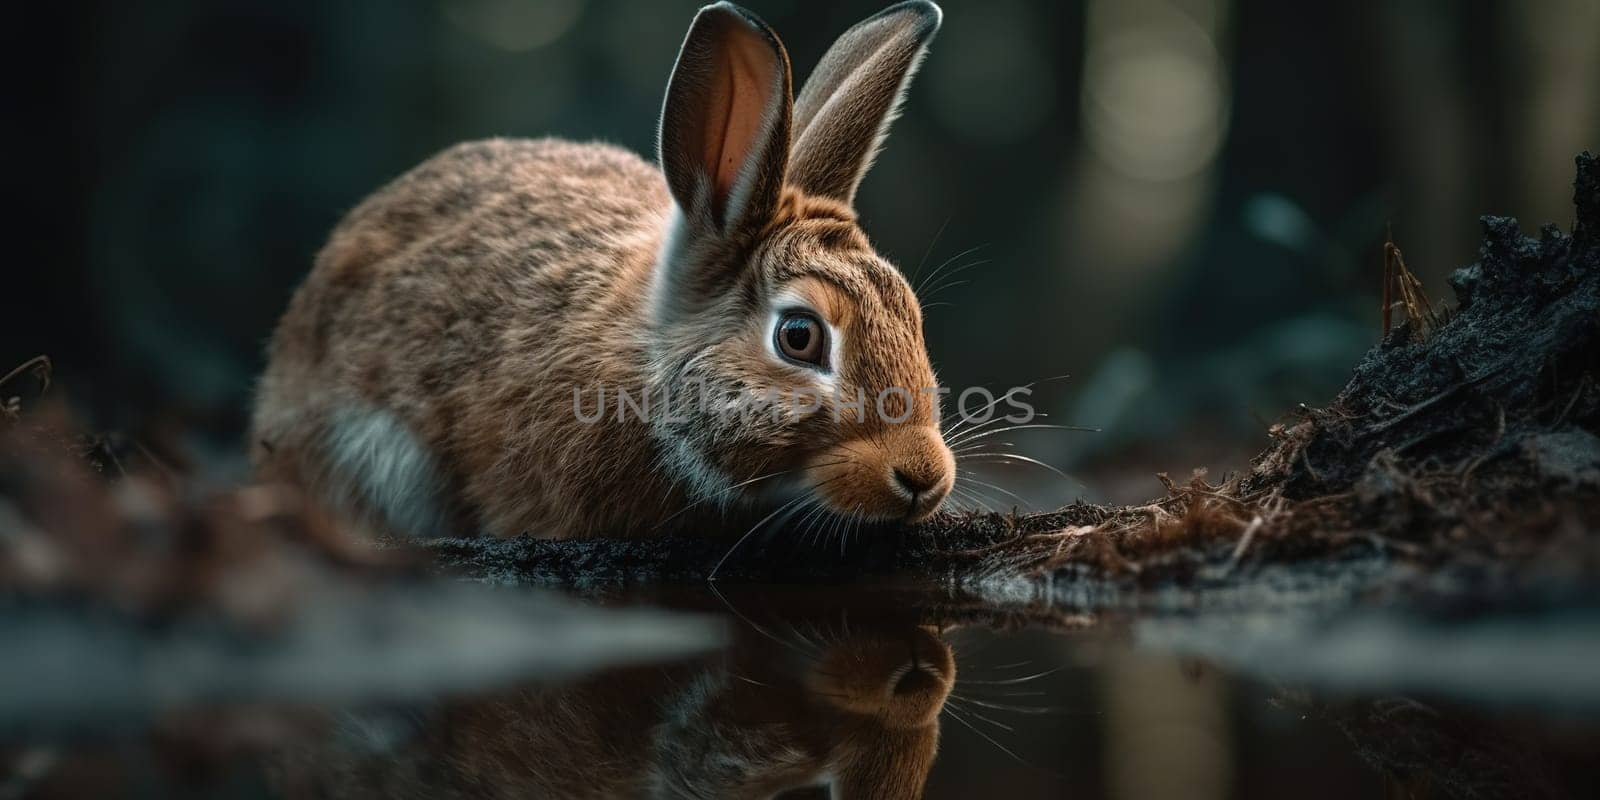 Big Wild Rabbit Drinks Water From The Creek In The Forest by tan4ikk1